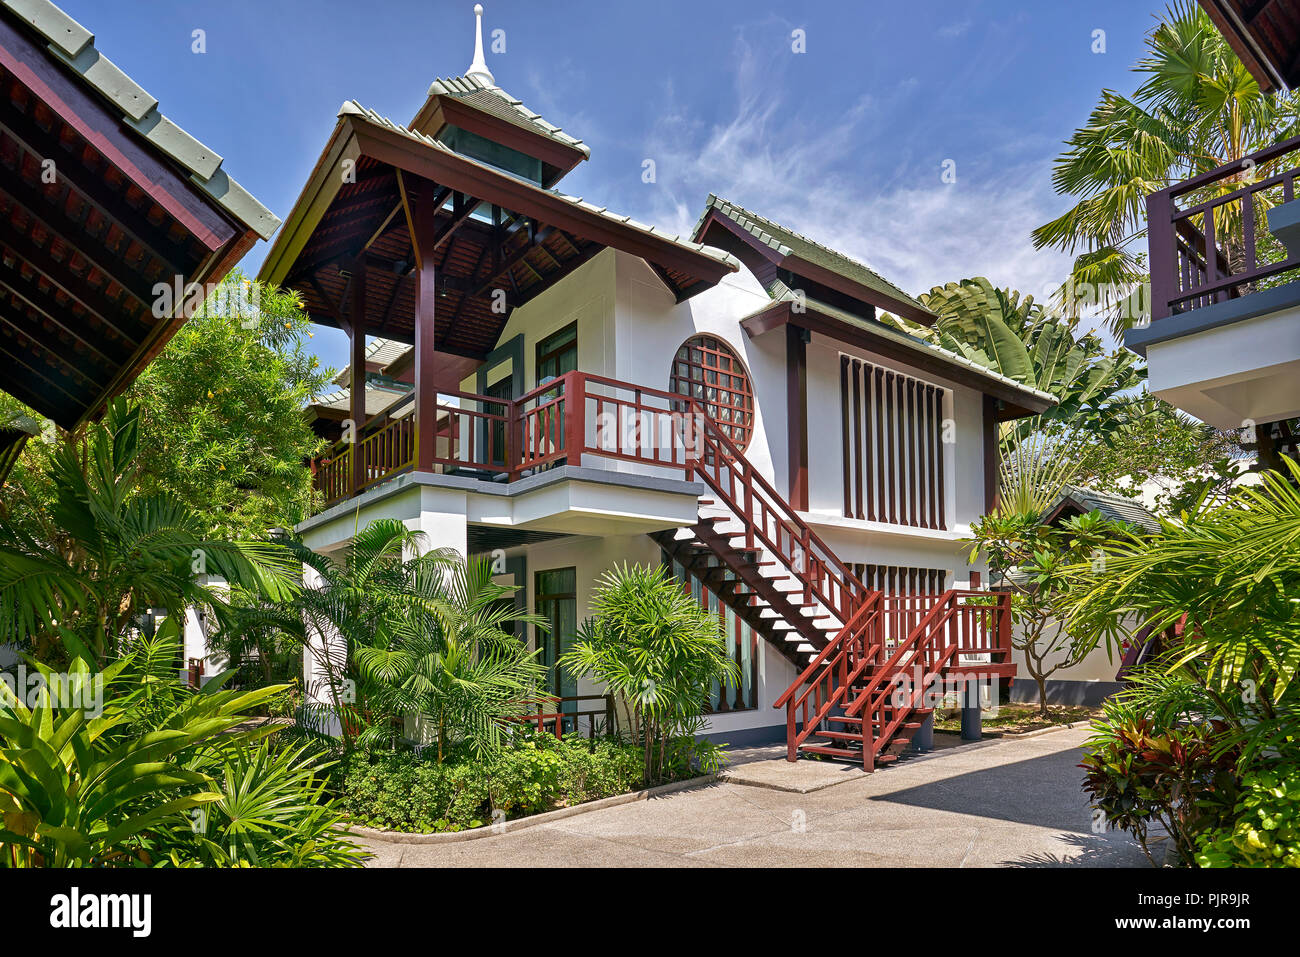 Thailand traditional house Thailand architecture. Southeast Asia Stock Photo